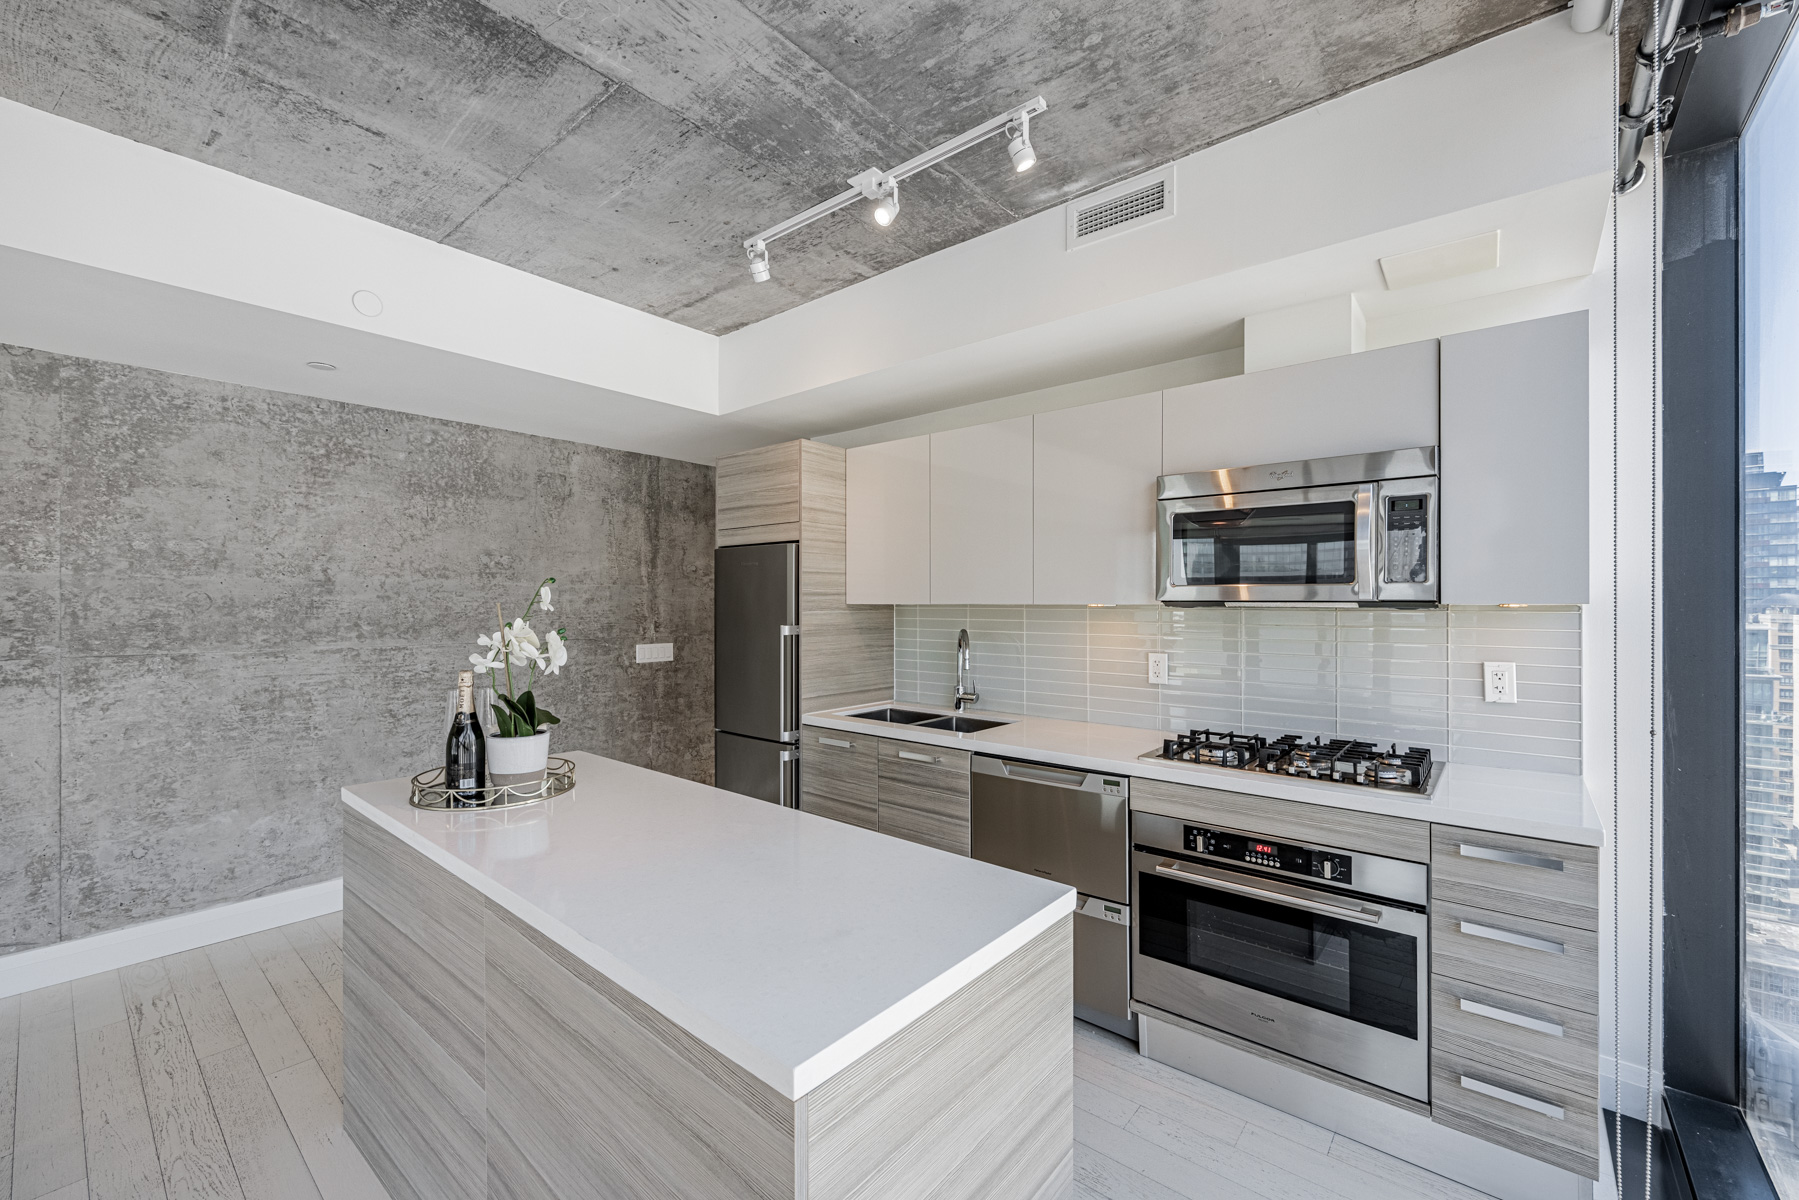 Modern condo kitchen with track lights and under-cabinet lighting.